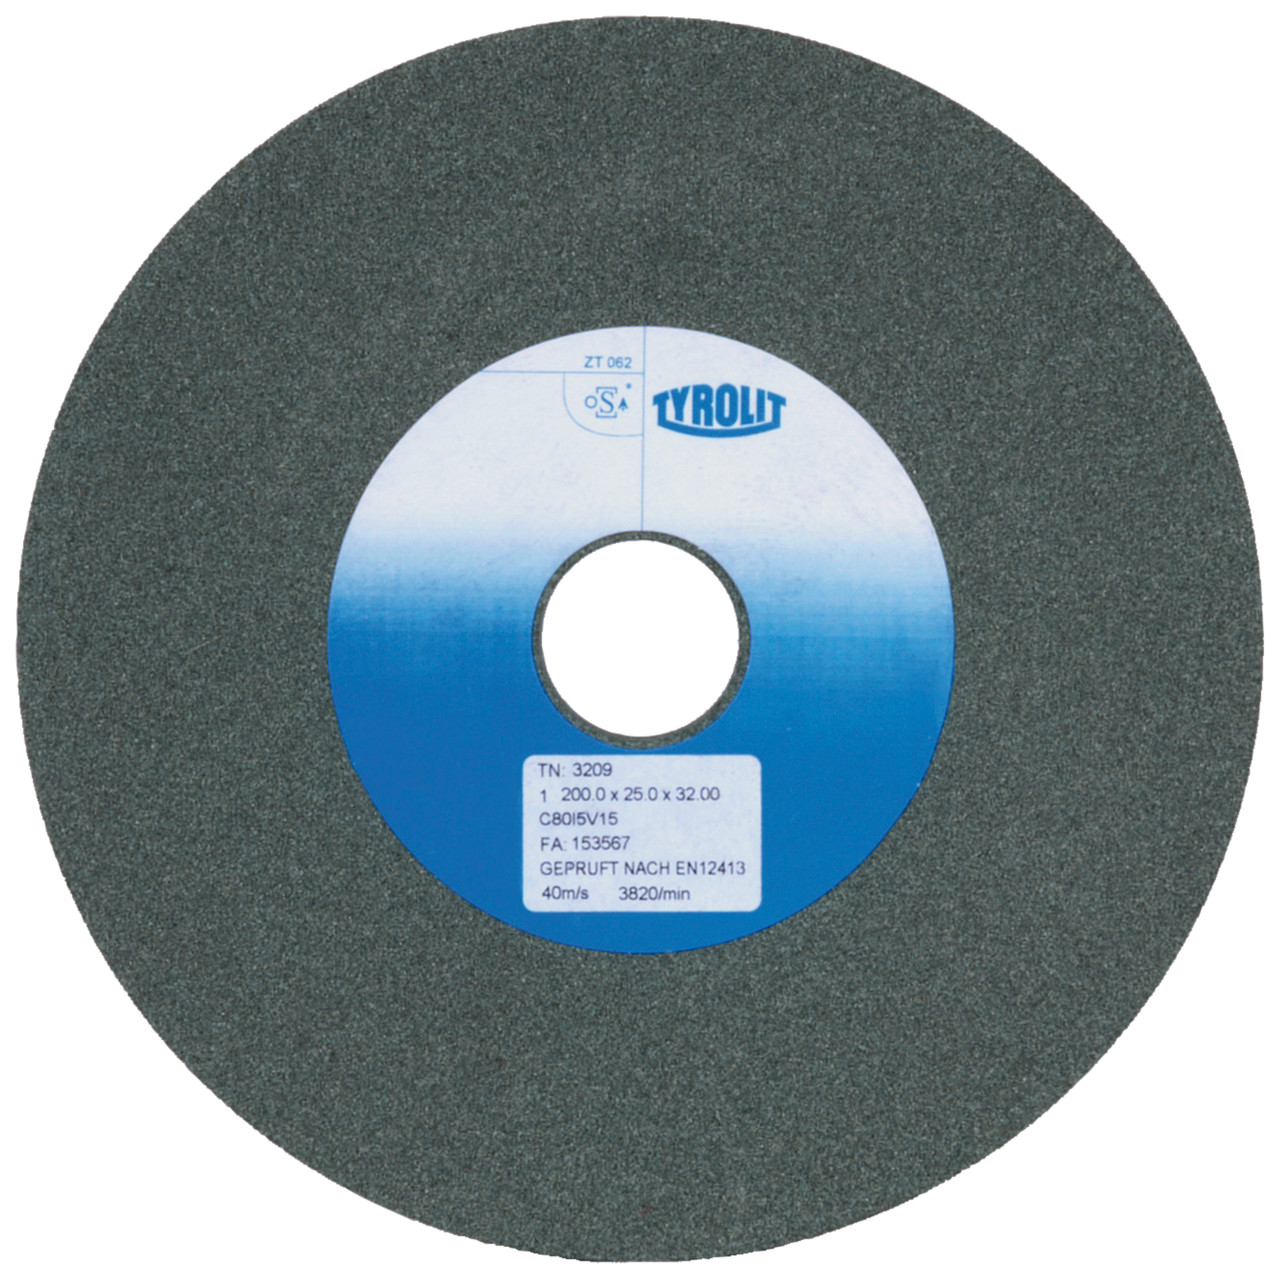 Tyrolit Conventional ceramic grinding discs DxDxH 175x20x32 For carbide and cast iron, shape: 1, Art. 2905